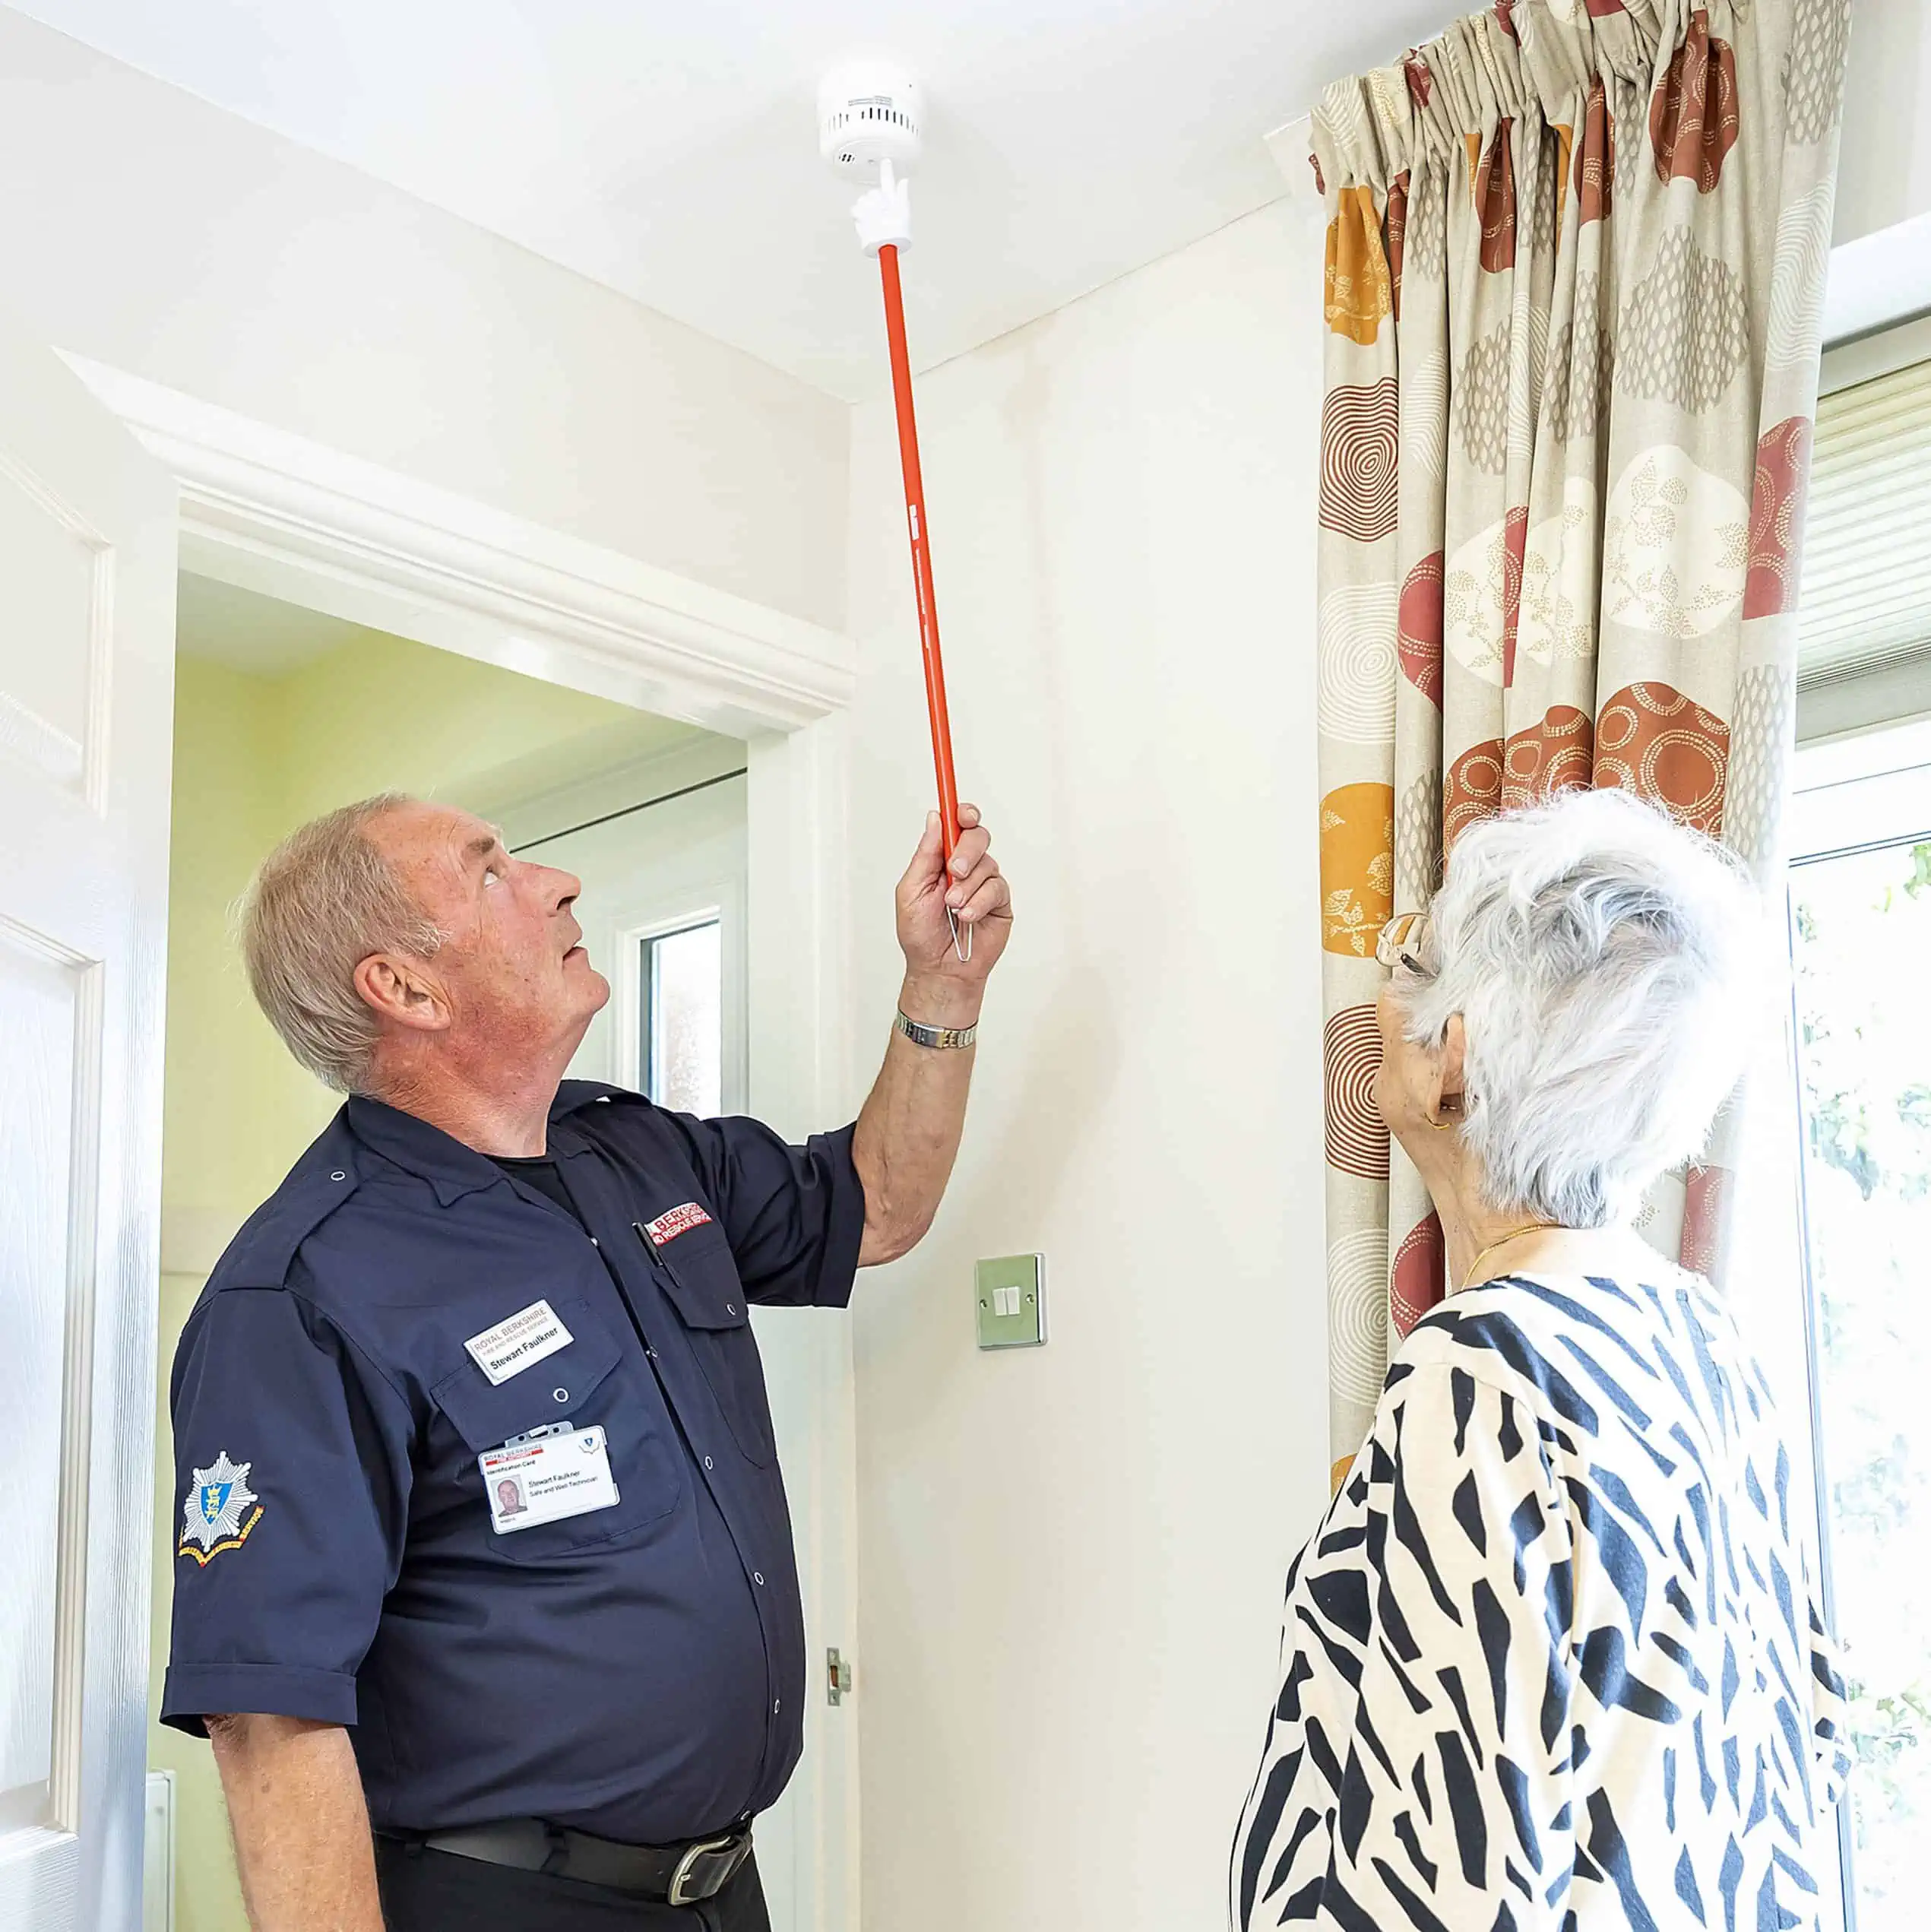 A safe and well technician uses a red stick to test a smoke alarm on a roof whilst a woman watches on.